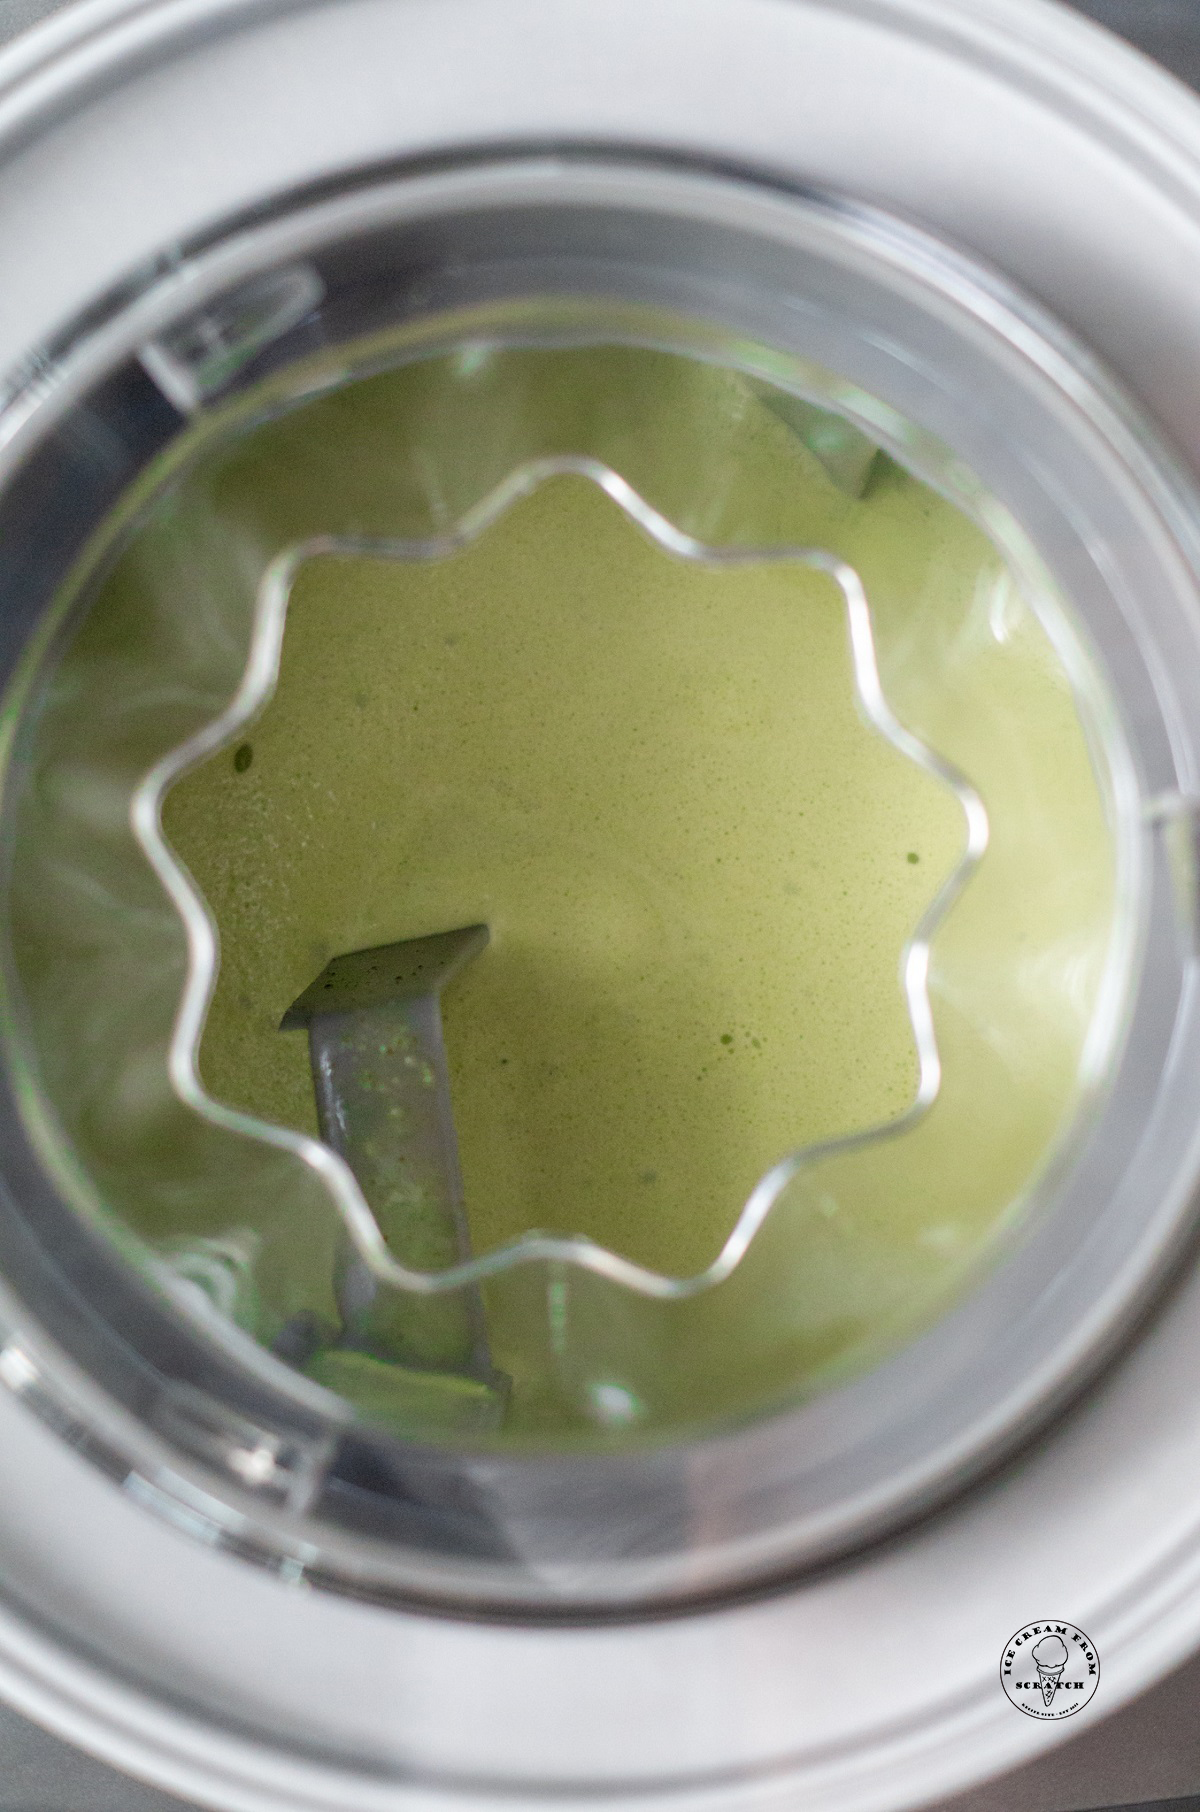 A photo of matcha ice cream churning in an ice cream maker, viewed from above